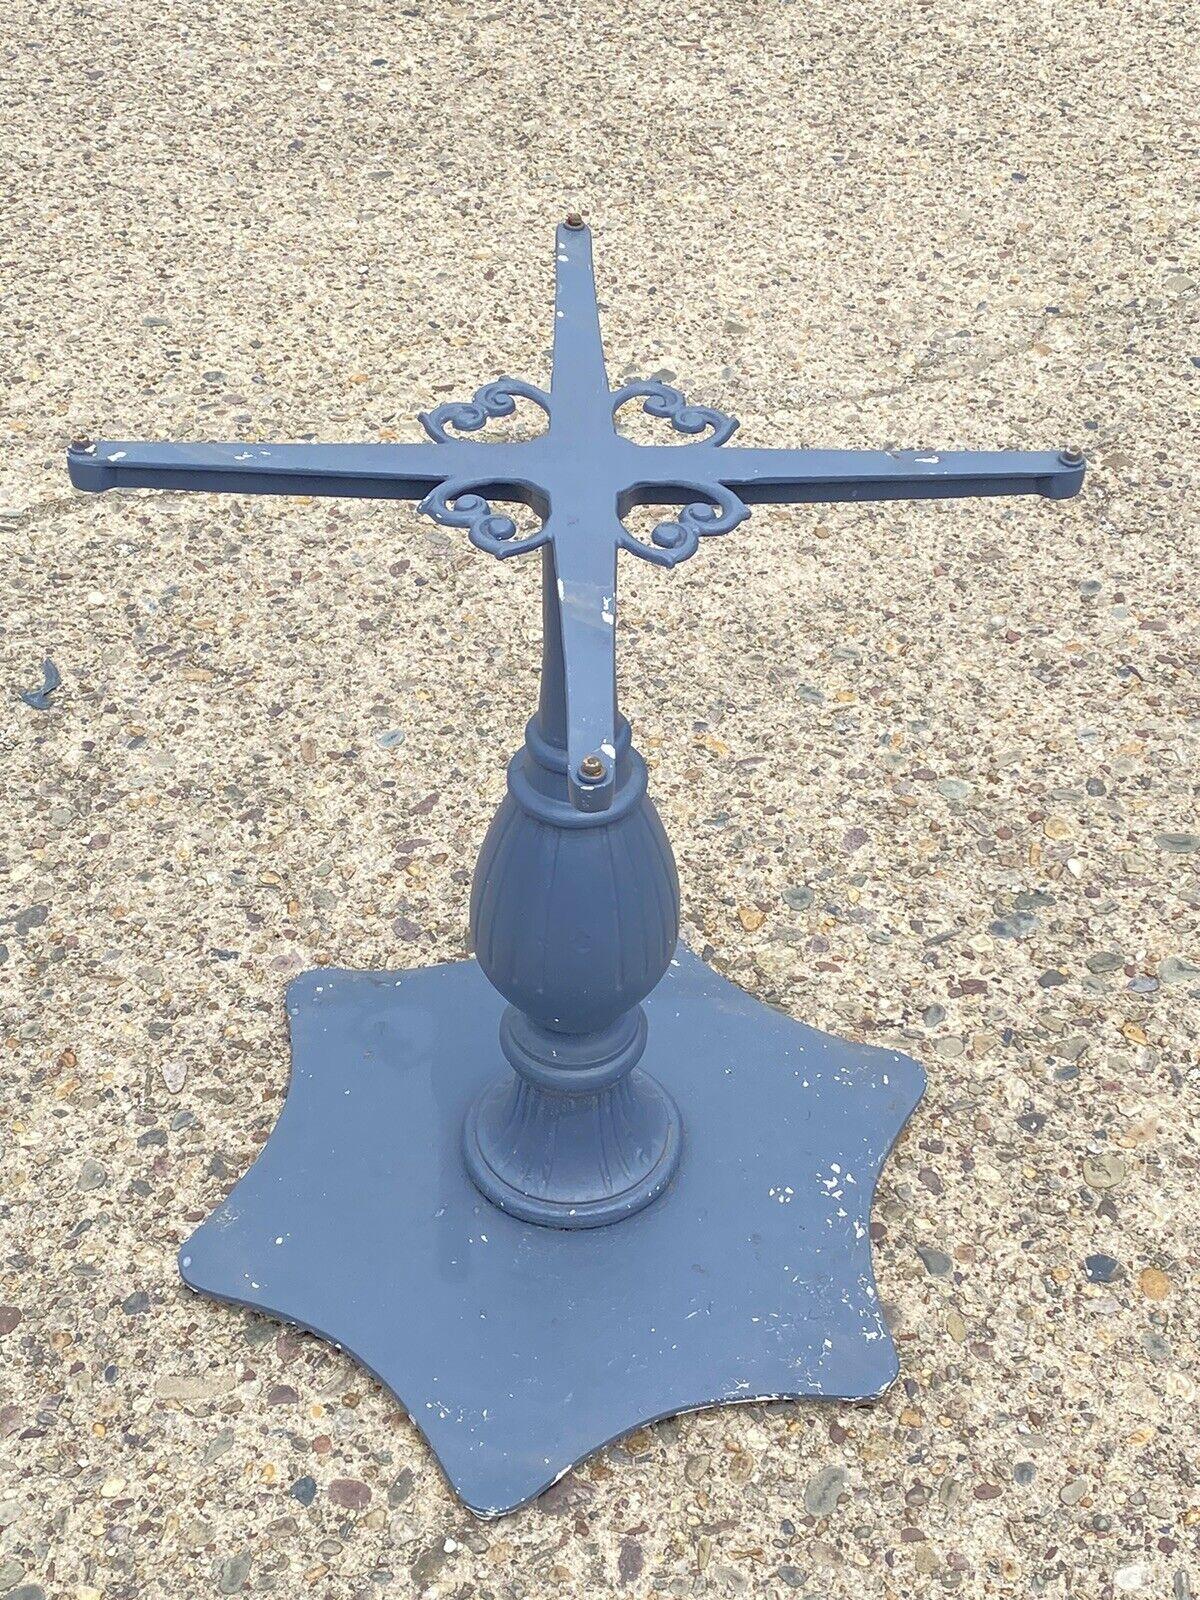 Vintage Cast Aluminum Hollywood Regency Dining Center Table Pedestal Base. Circa Late 20th Century.
Measurements: 
Overall: 29